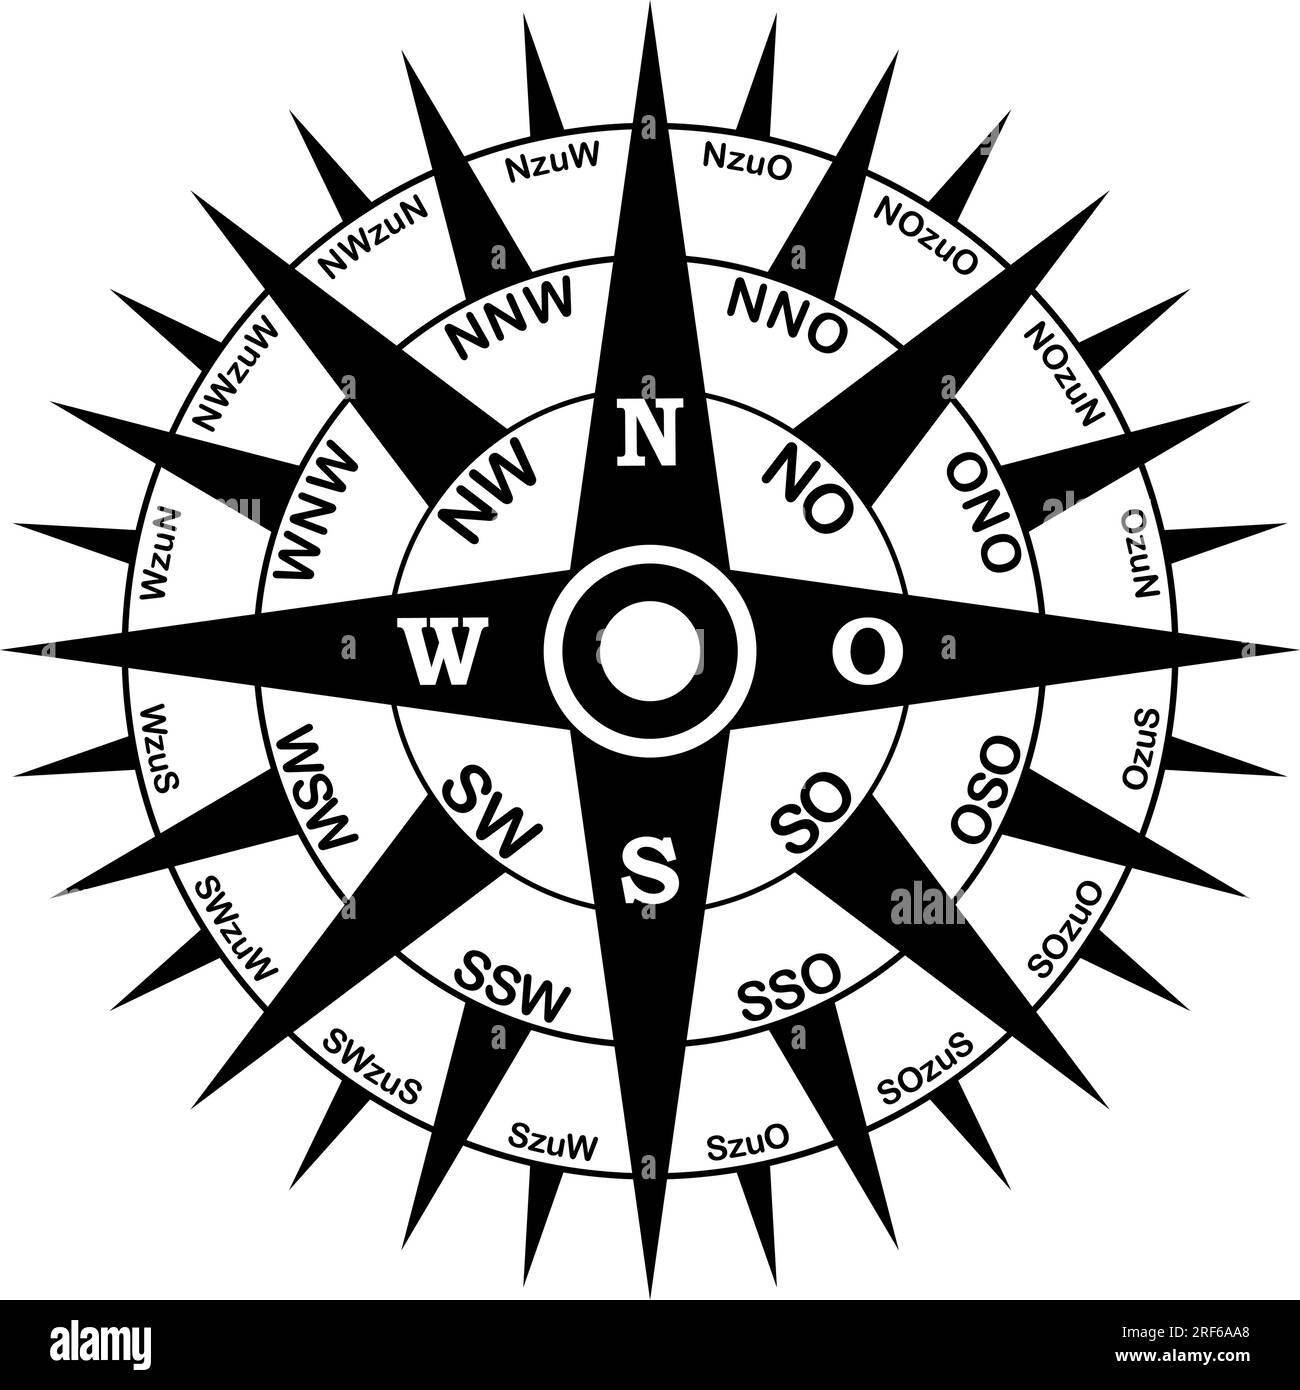 Compass rose vector in German language. Isolated background. Compass rose with all thirty two wind directions. Stock Vector